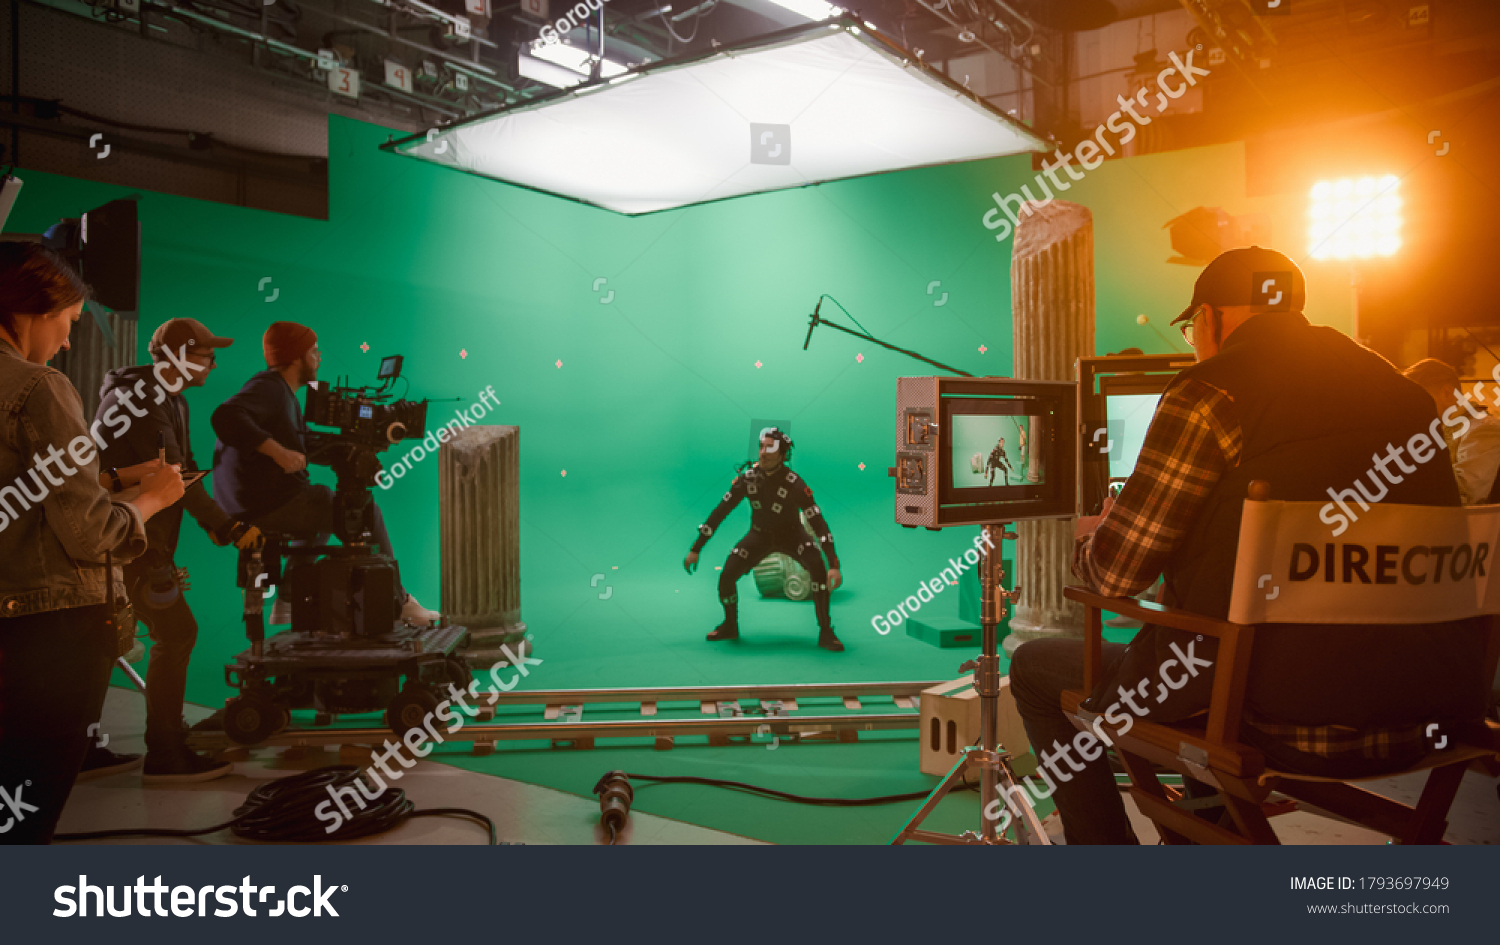 In the Big Film Studio Professional Crew Shooting Blockbuster Movie. Director Commands Cameraman to Start shooting Green Screen CGI Scene with Actor Wearing Motion Capture Suit and Head Rig #1793697949